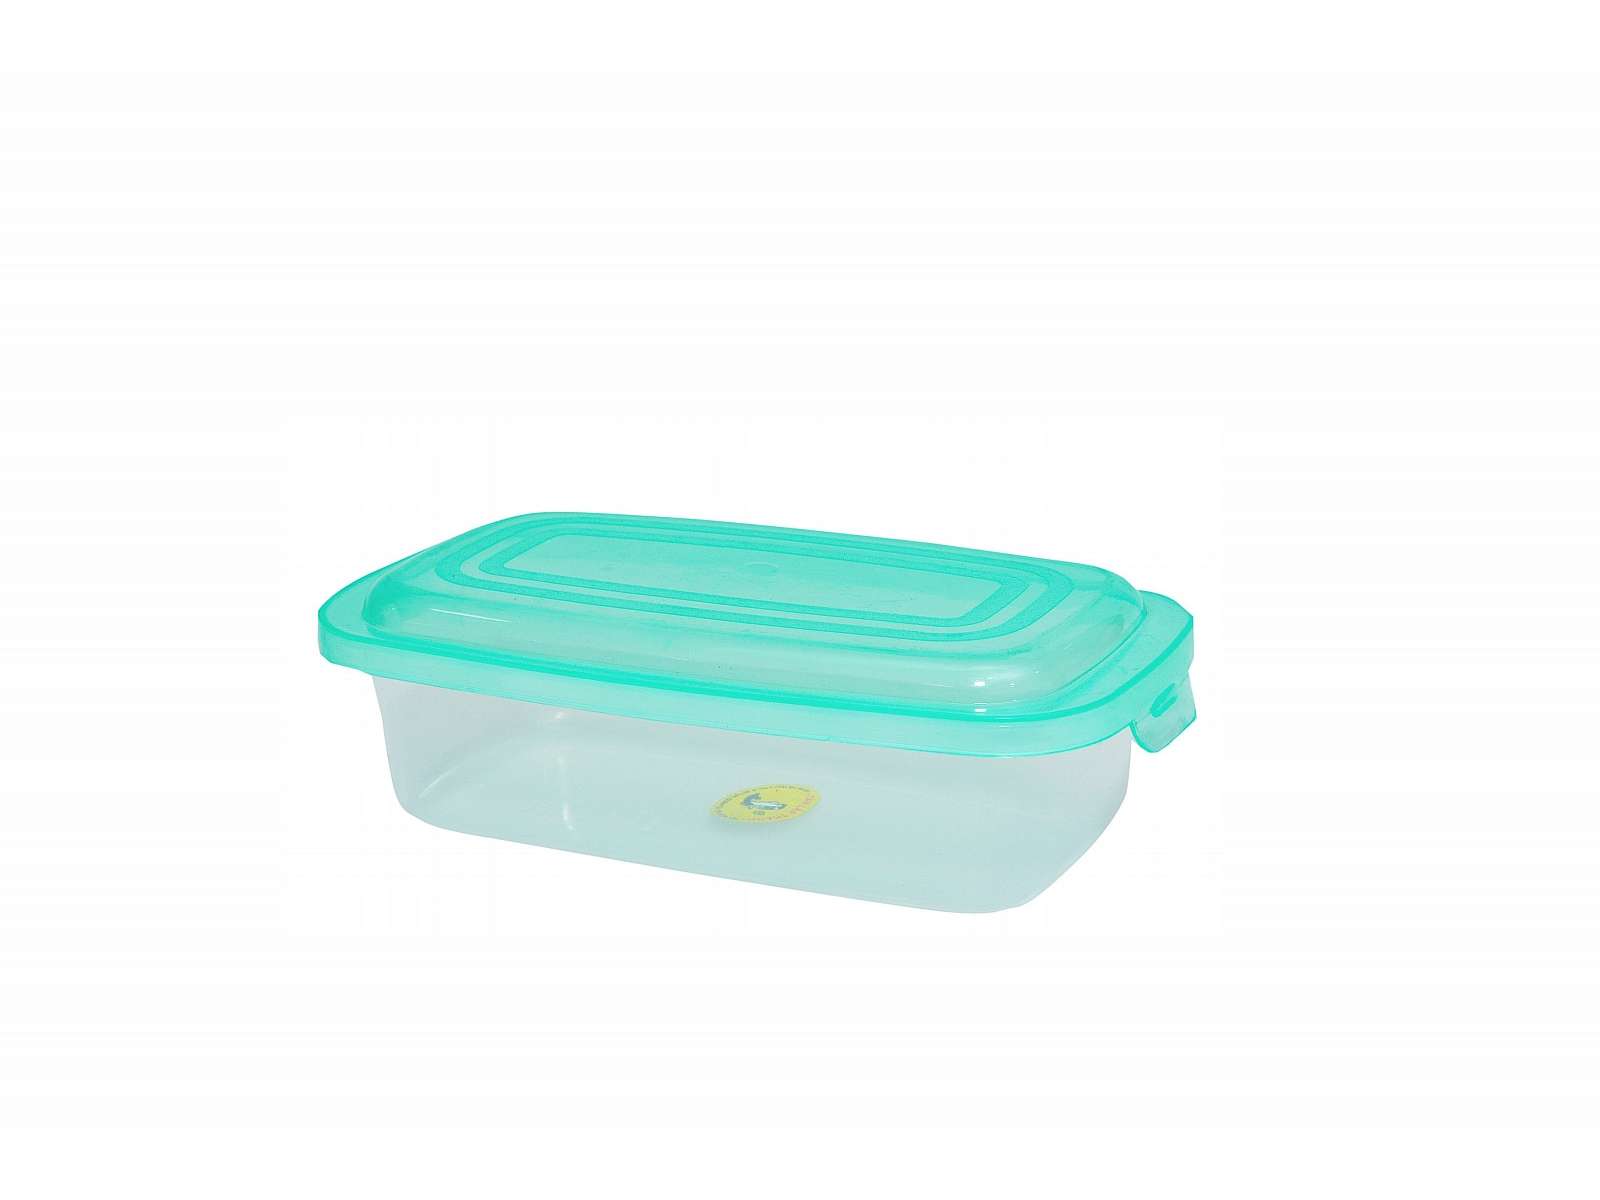 Rounded rectangular container - Small